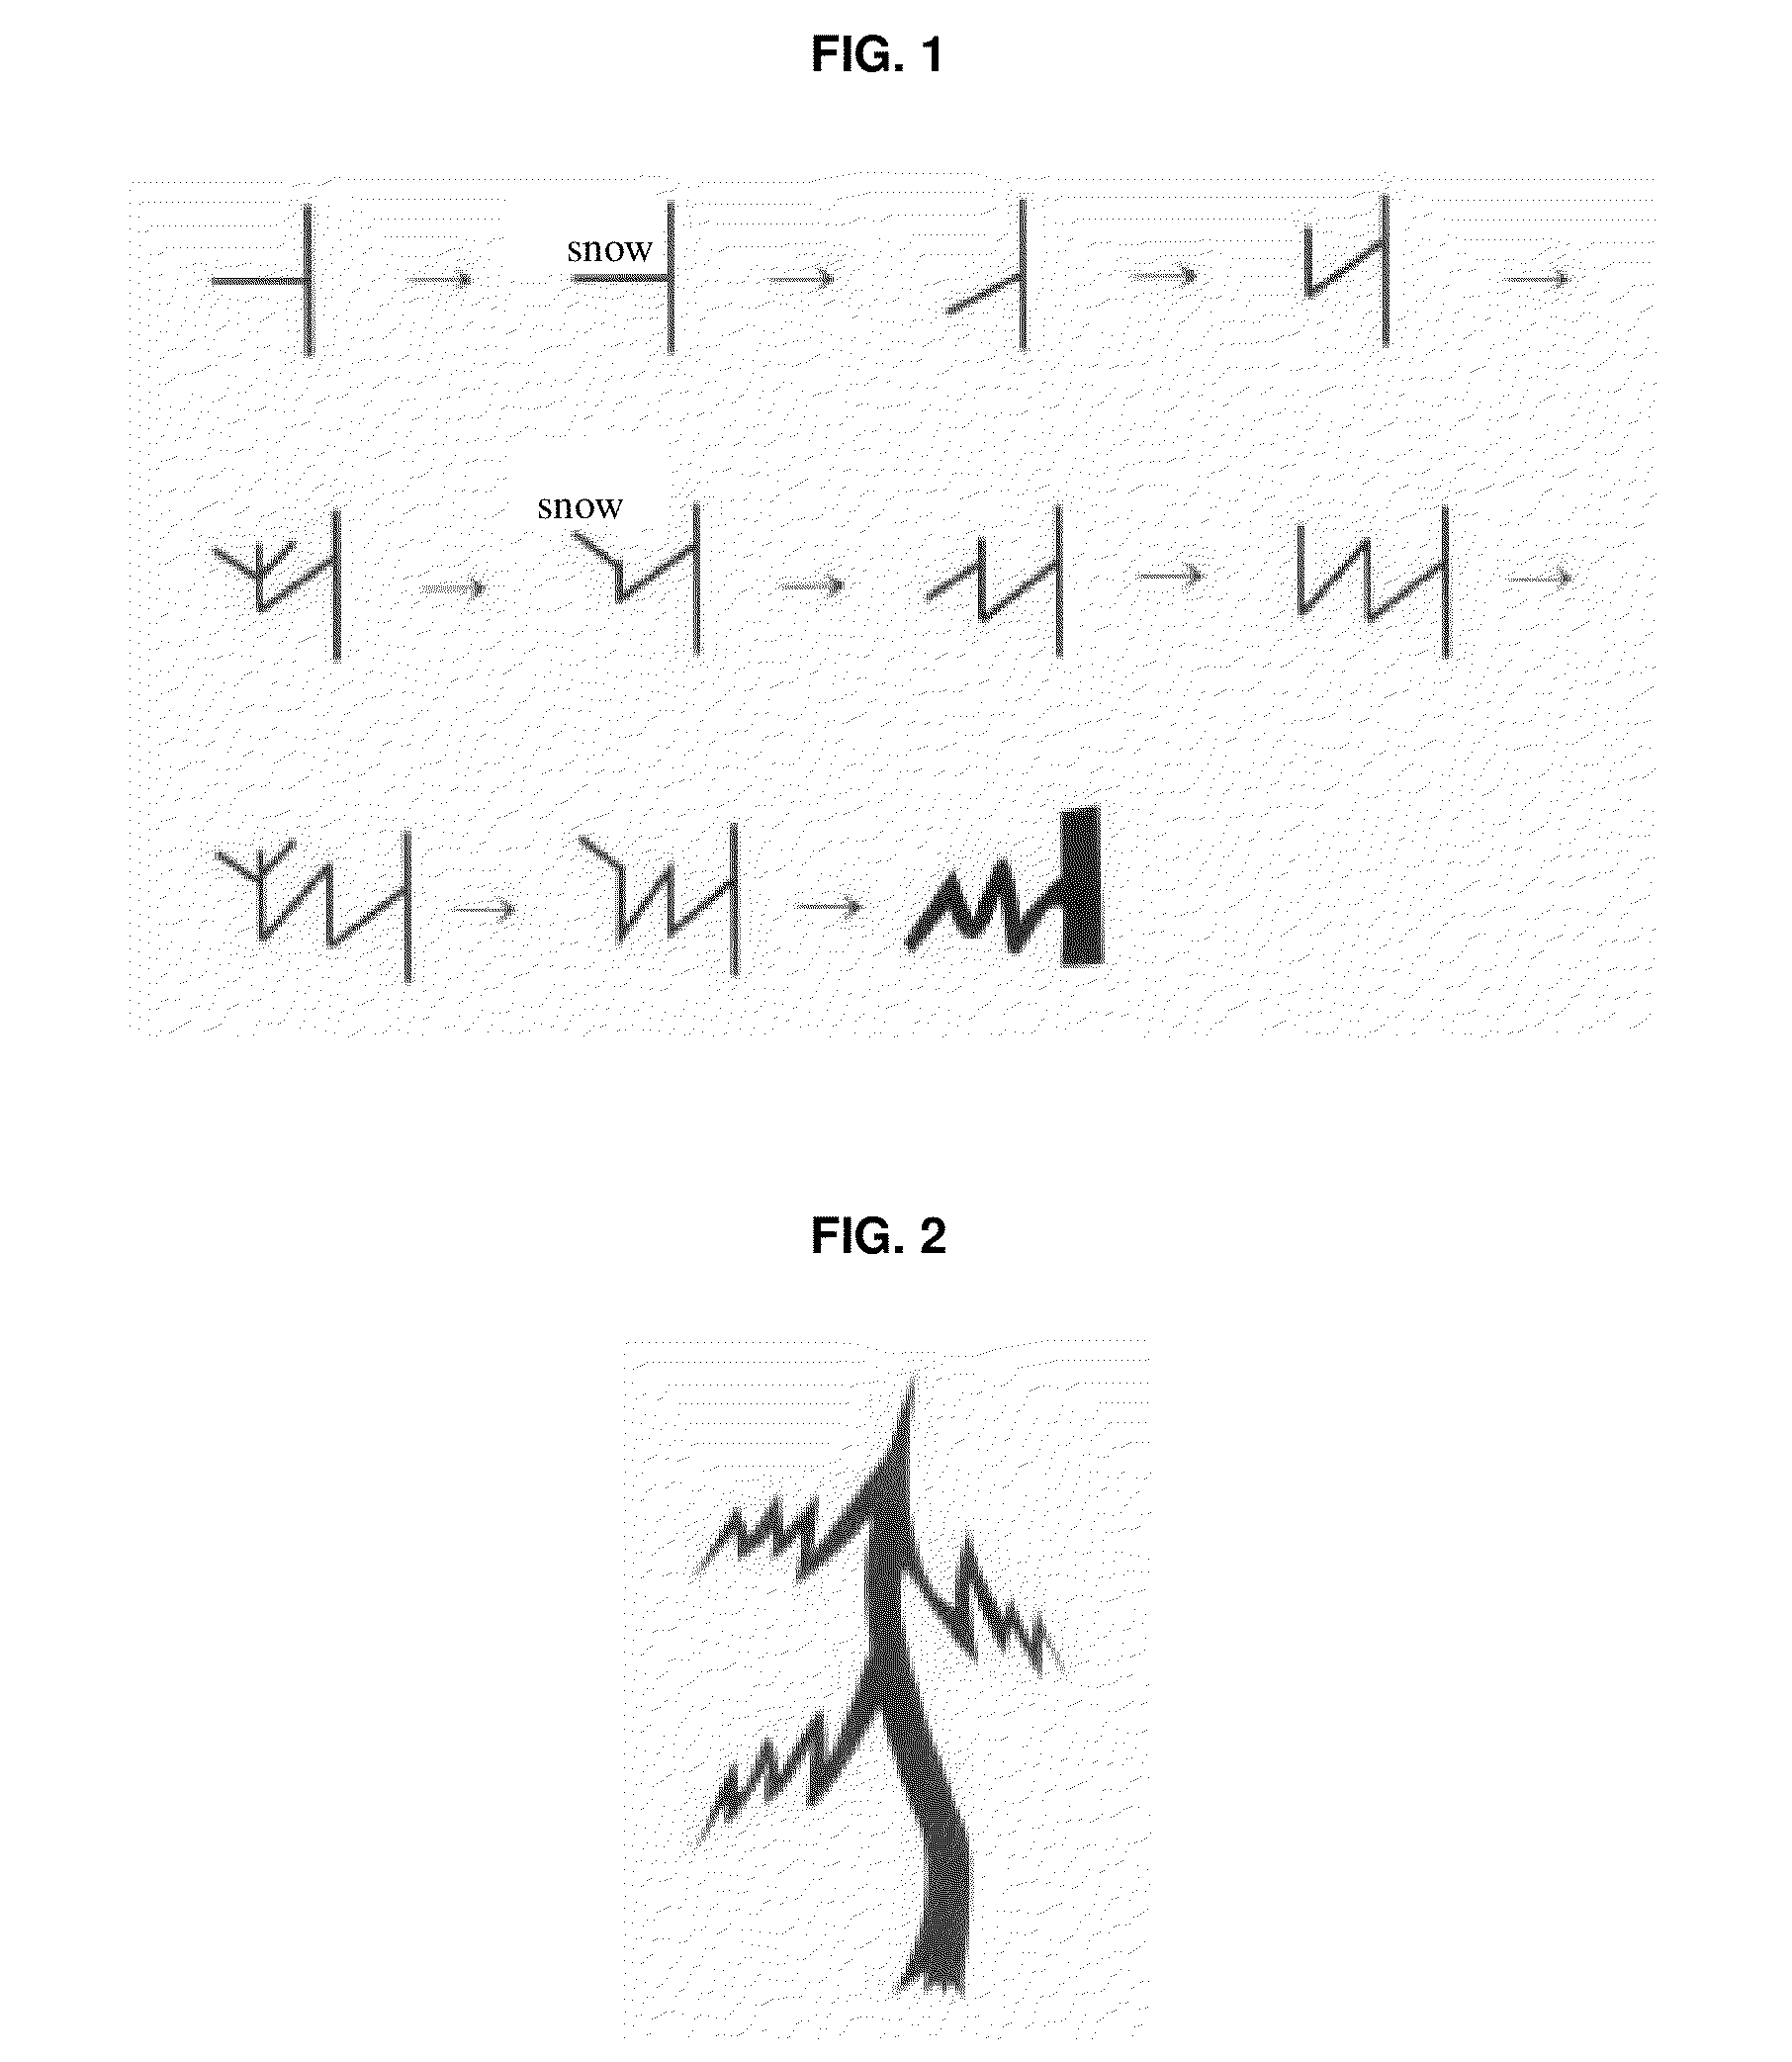 Method for forming ornamental tree by pruning and inducing growth of branches